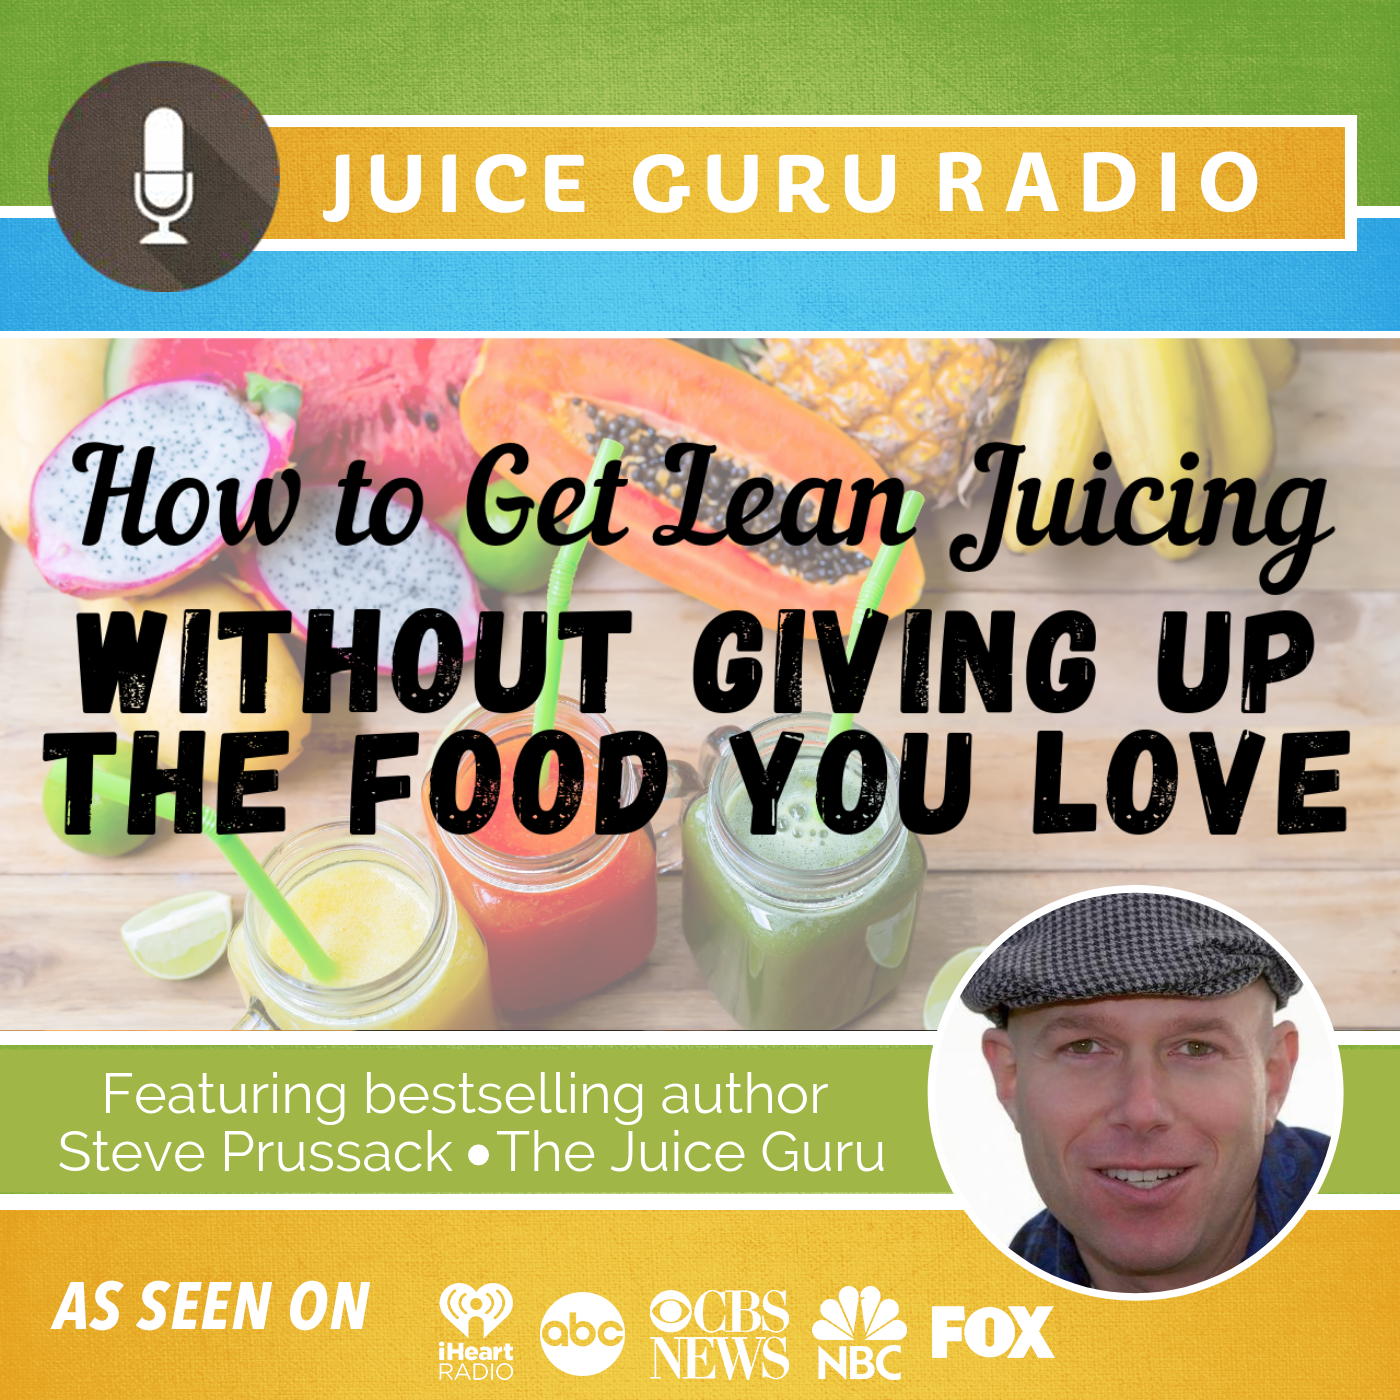 How to Get Lean Juicing Without Giving Up The Food You Love